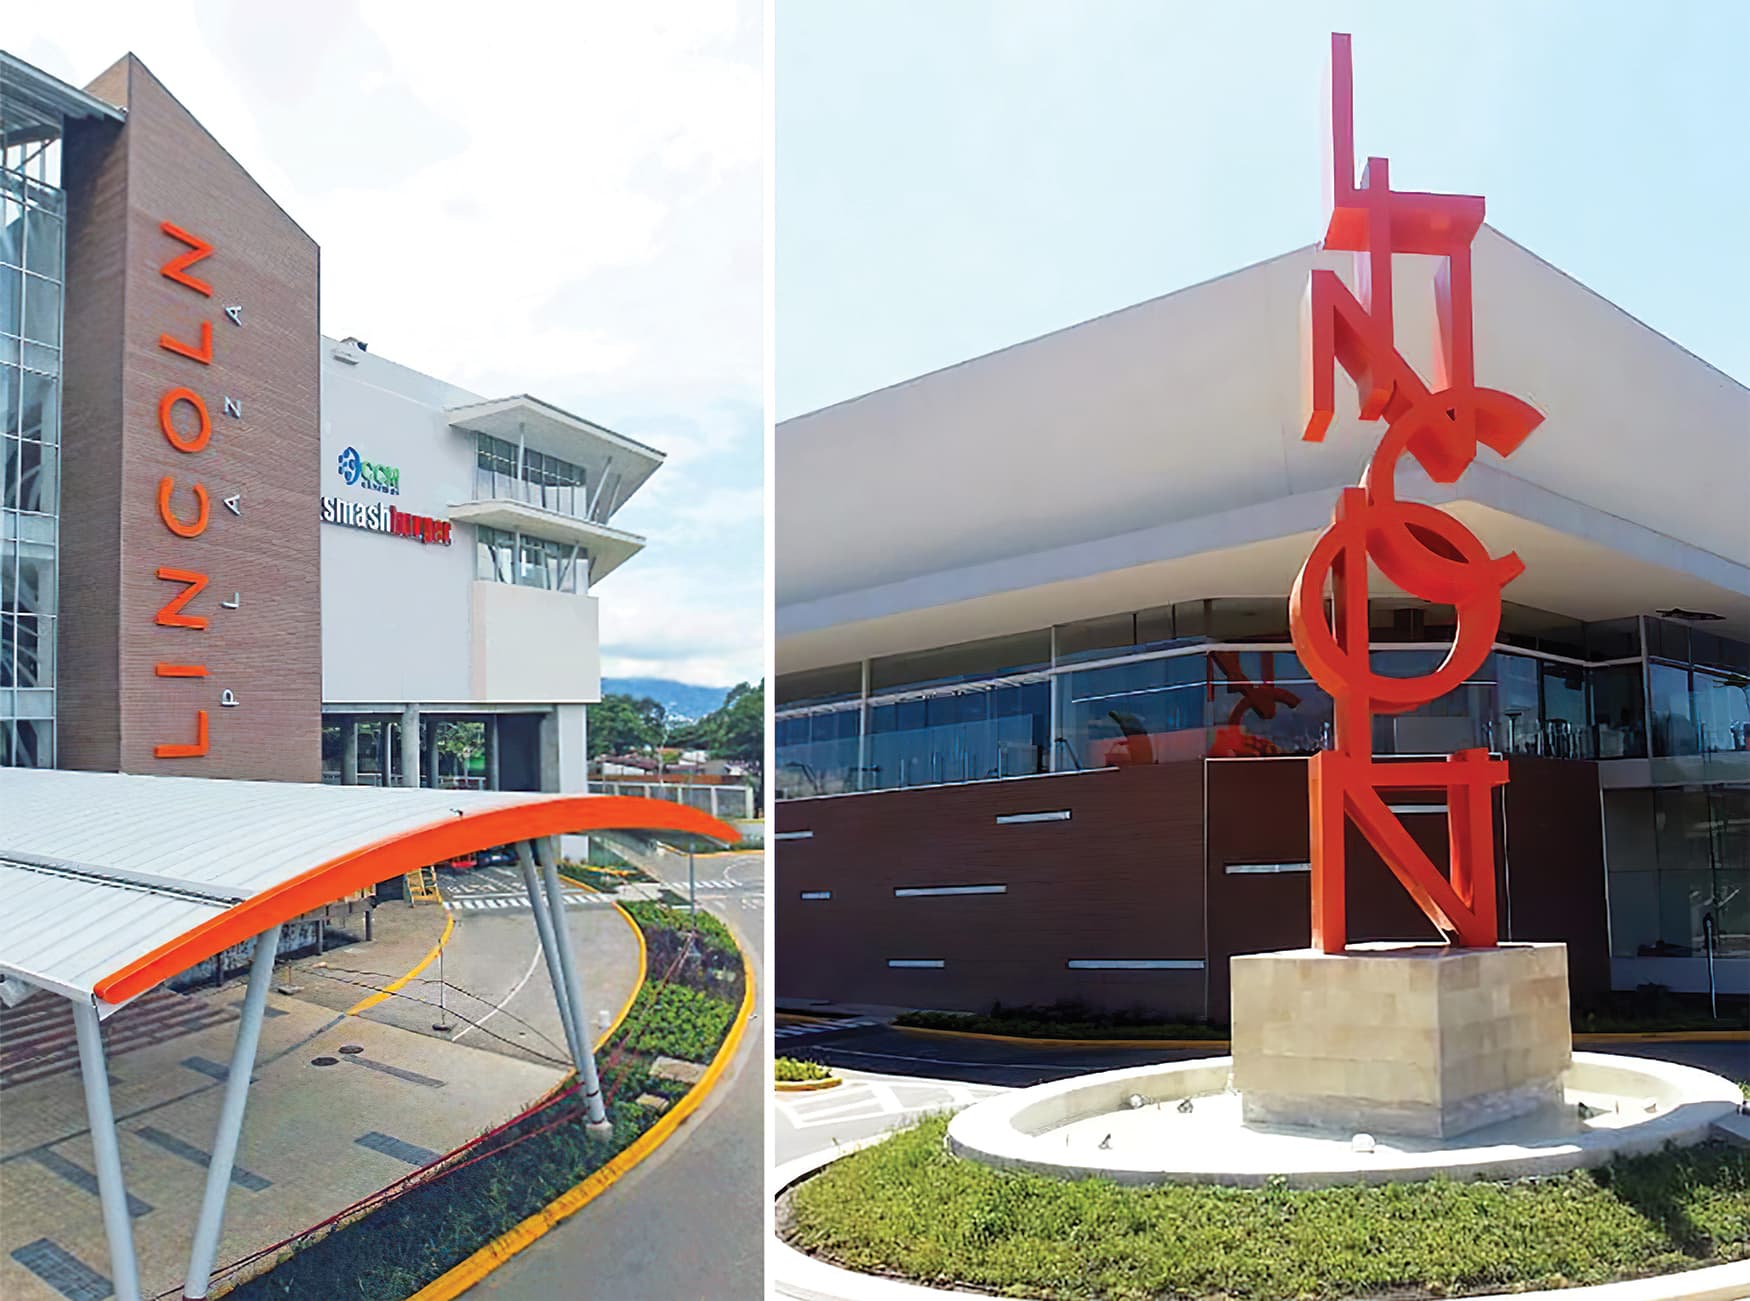 Lincoln Plaza, a retail destination in located in San Jose, Costa Rica. RSM Design brought environmental graphic design and architectural graphic design. Monument Signage. Project Identity.